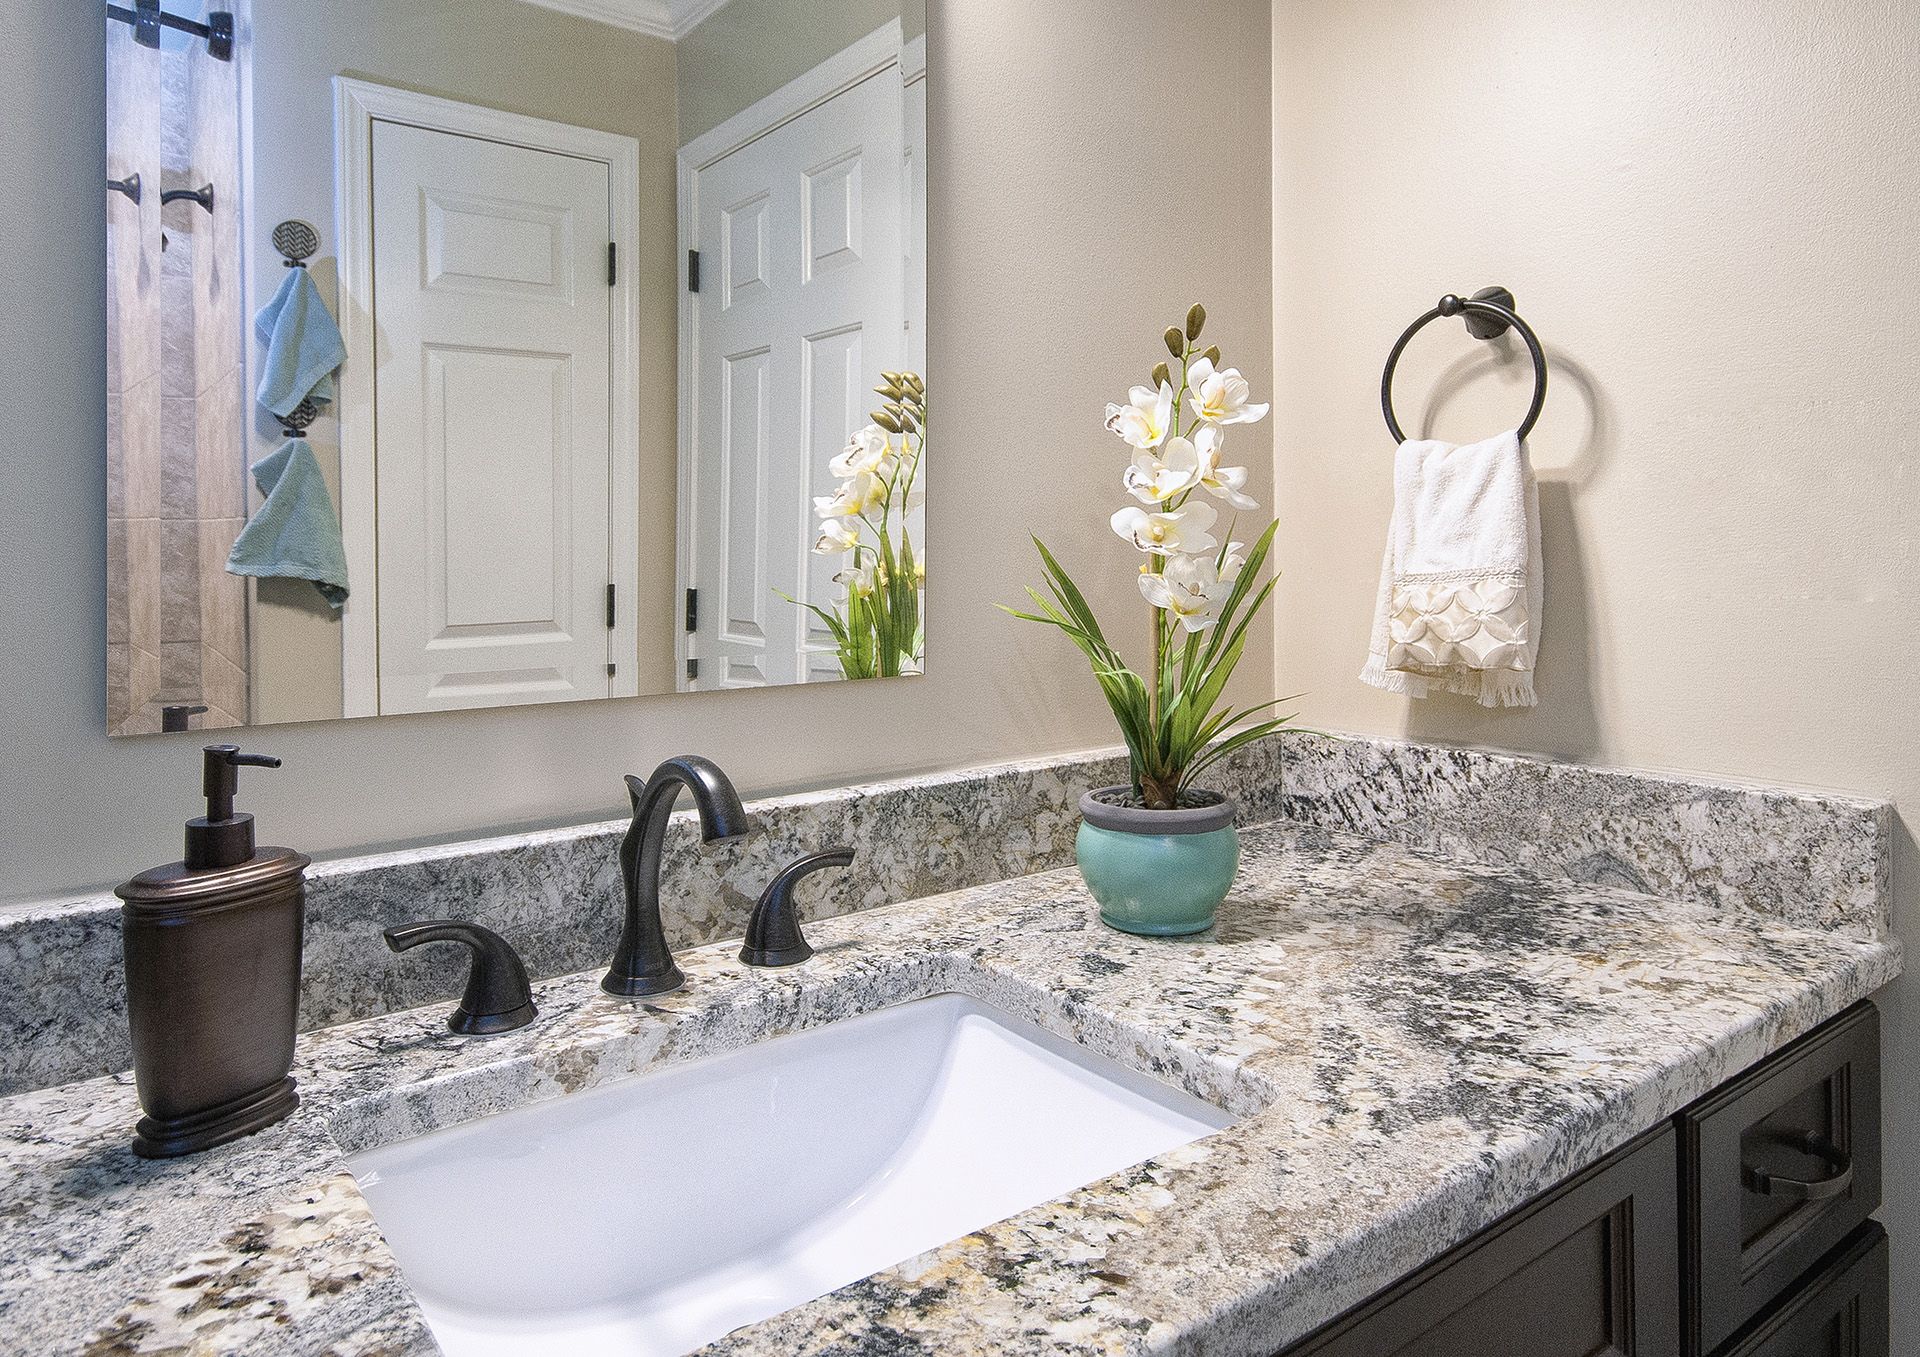 Is Your Guest Bathroom Ready For The Holidays?